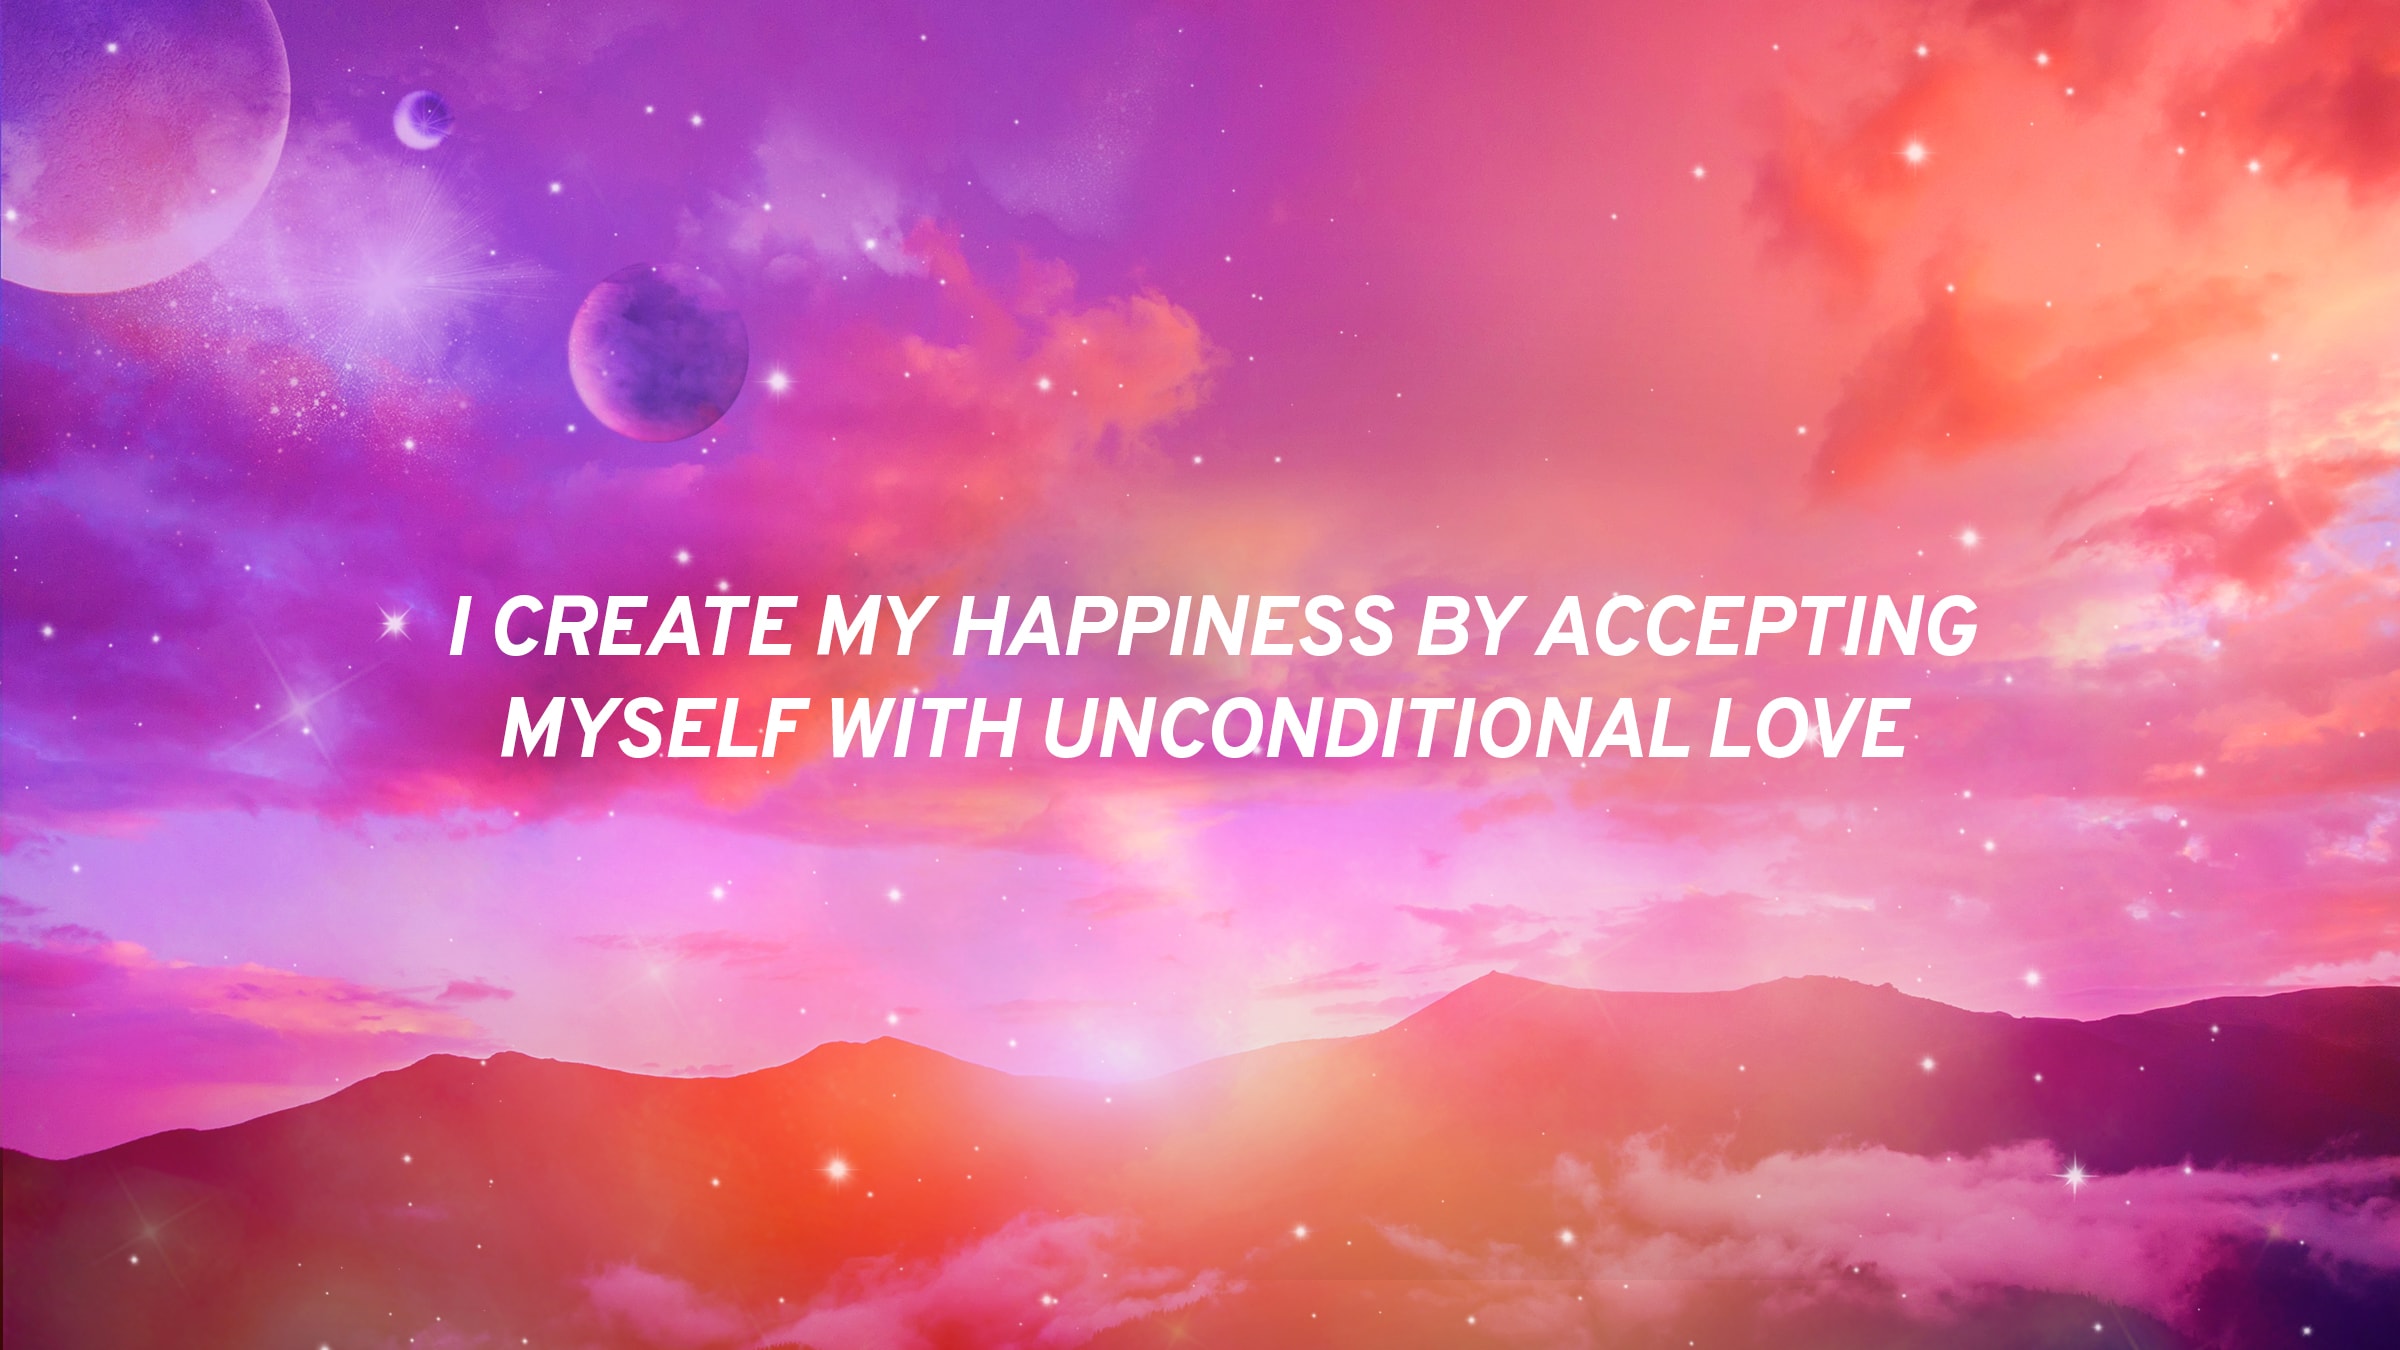 Affirmations for how to love yourself on Valentine’s Day and every day.